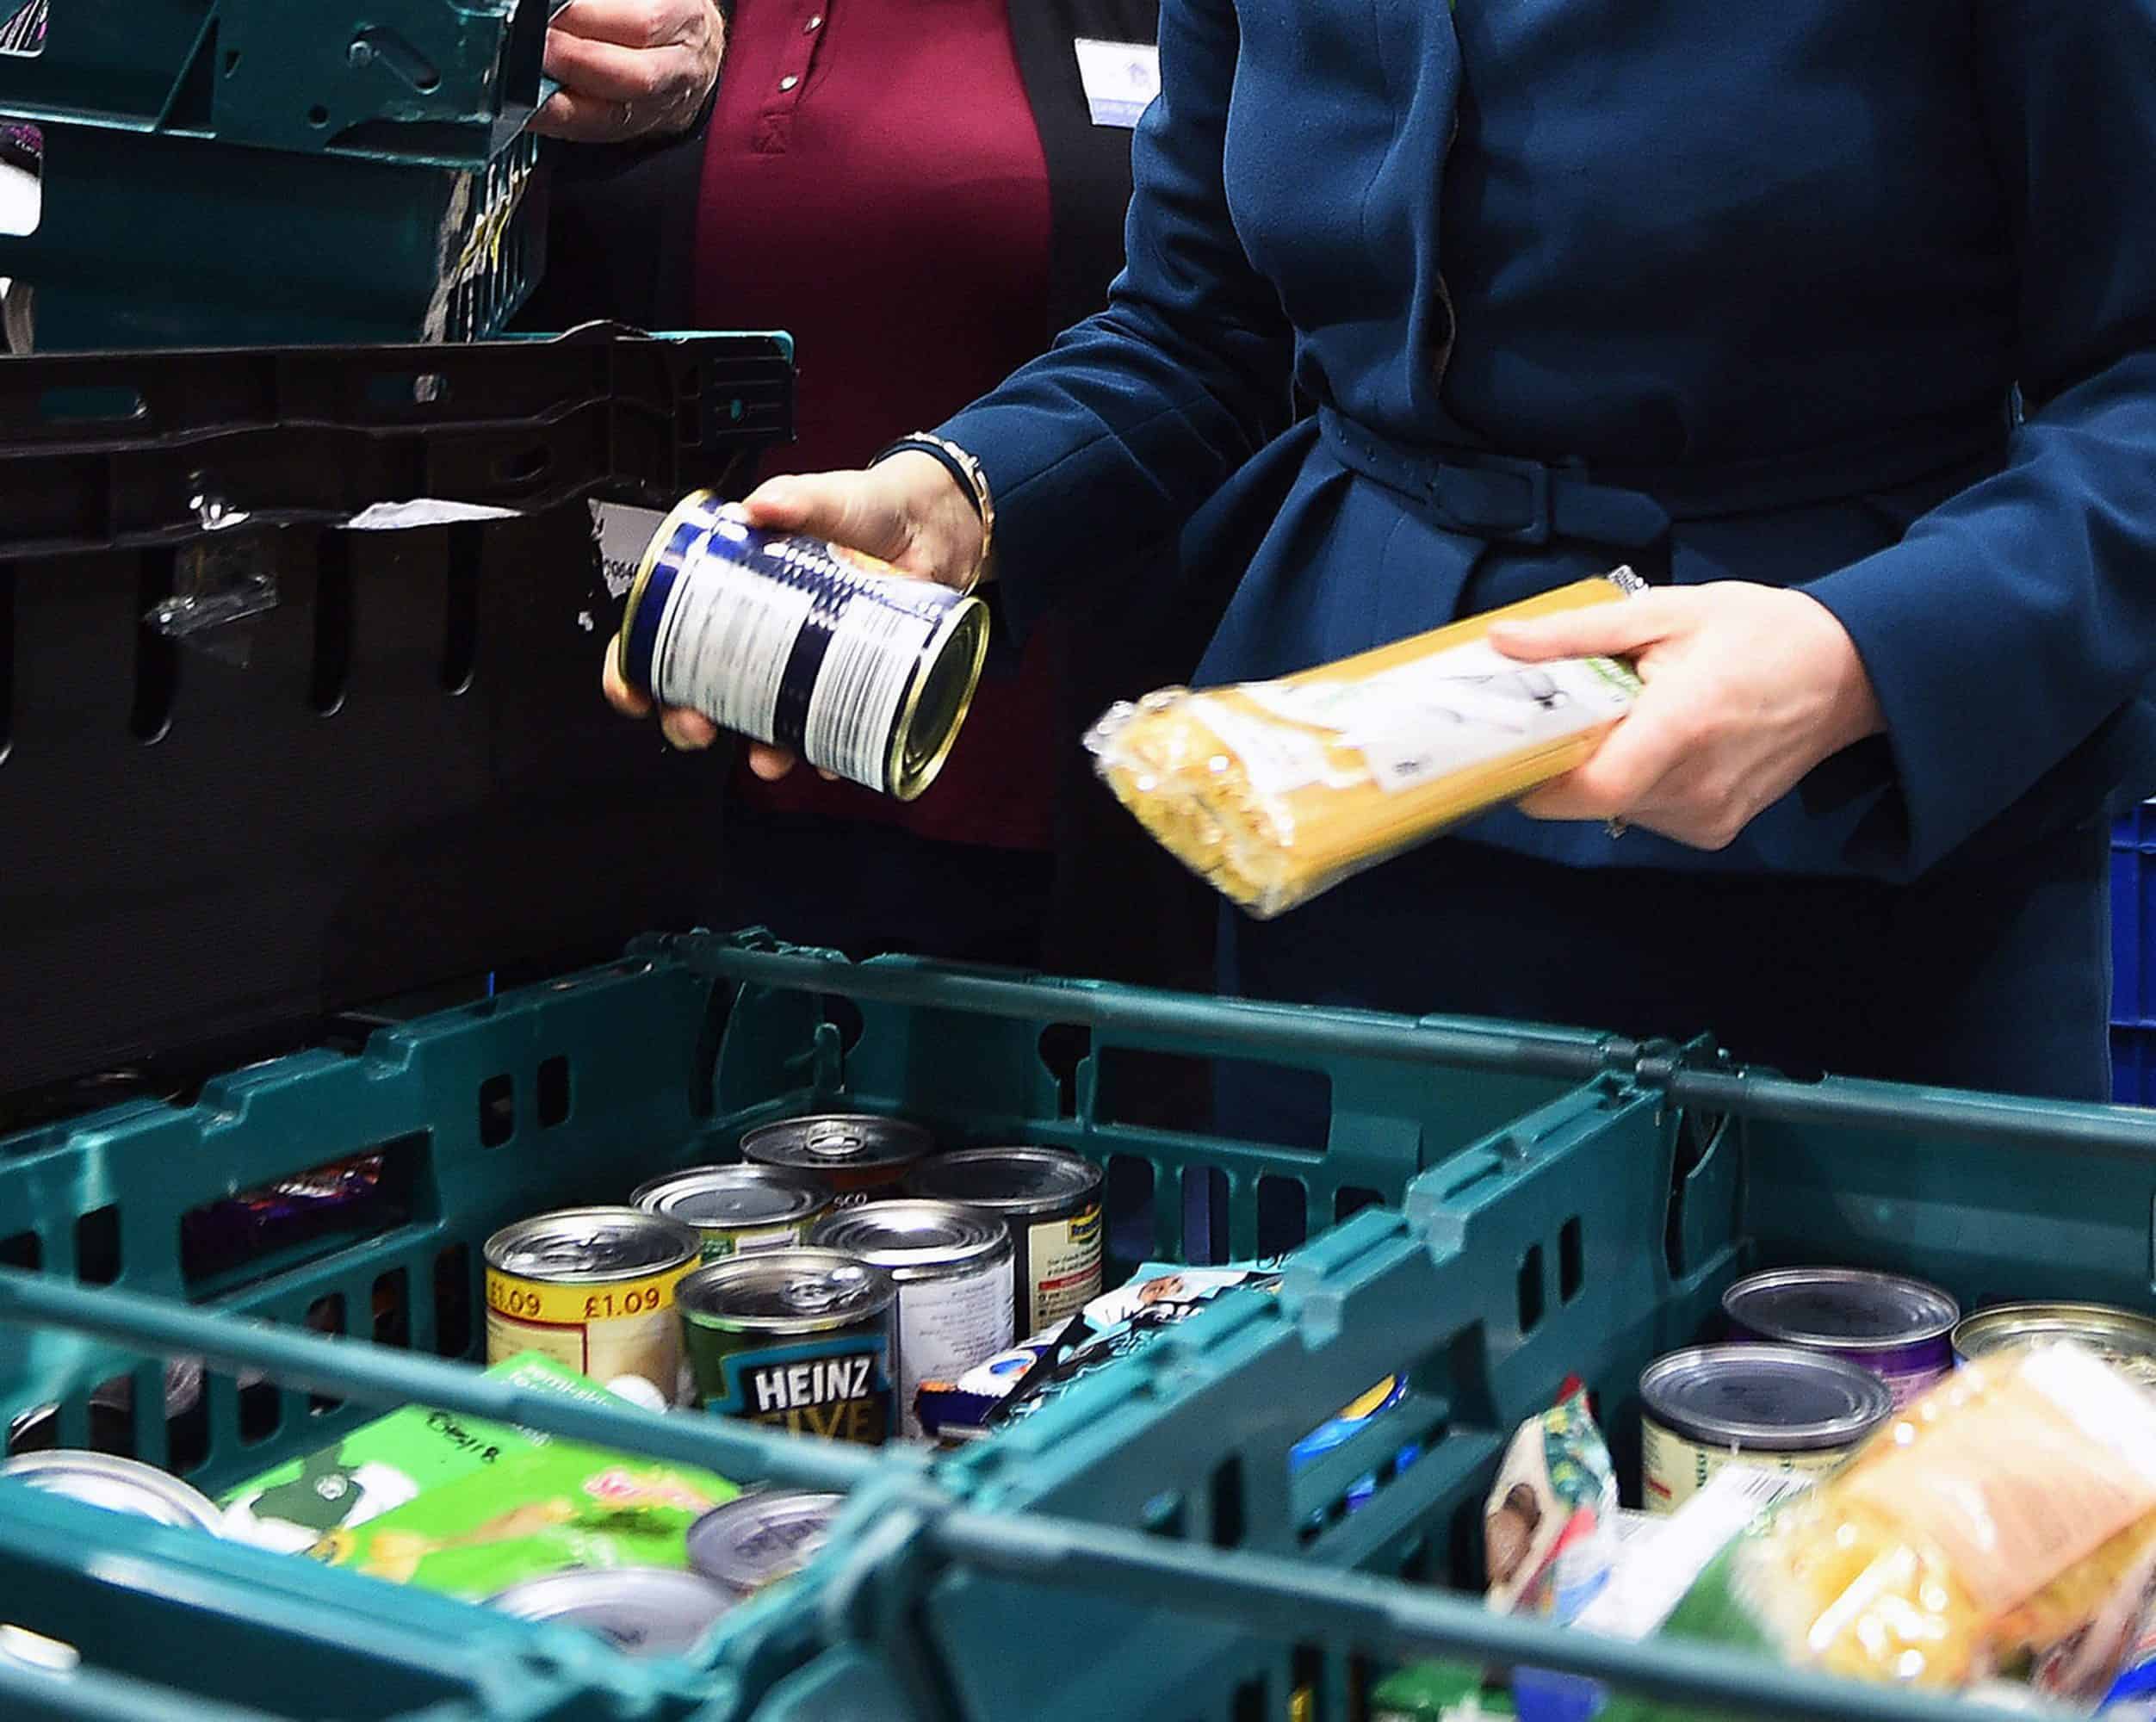 Campaign launched to keep the lights on at Britain’s biggest food bank